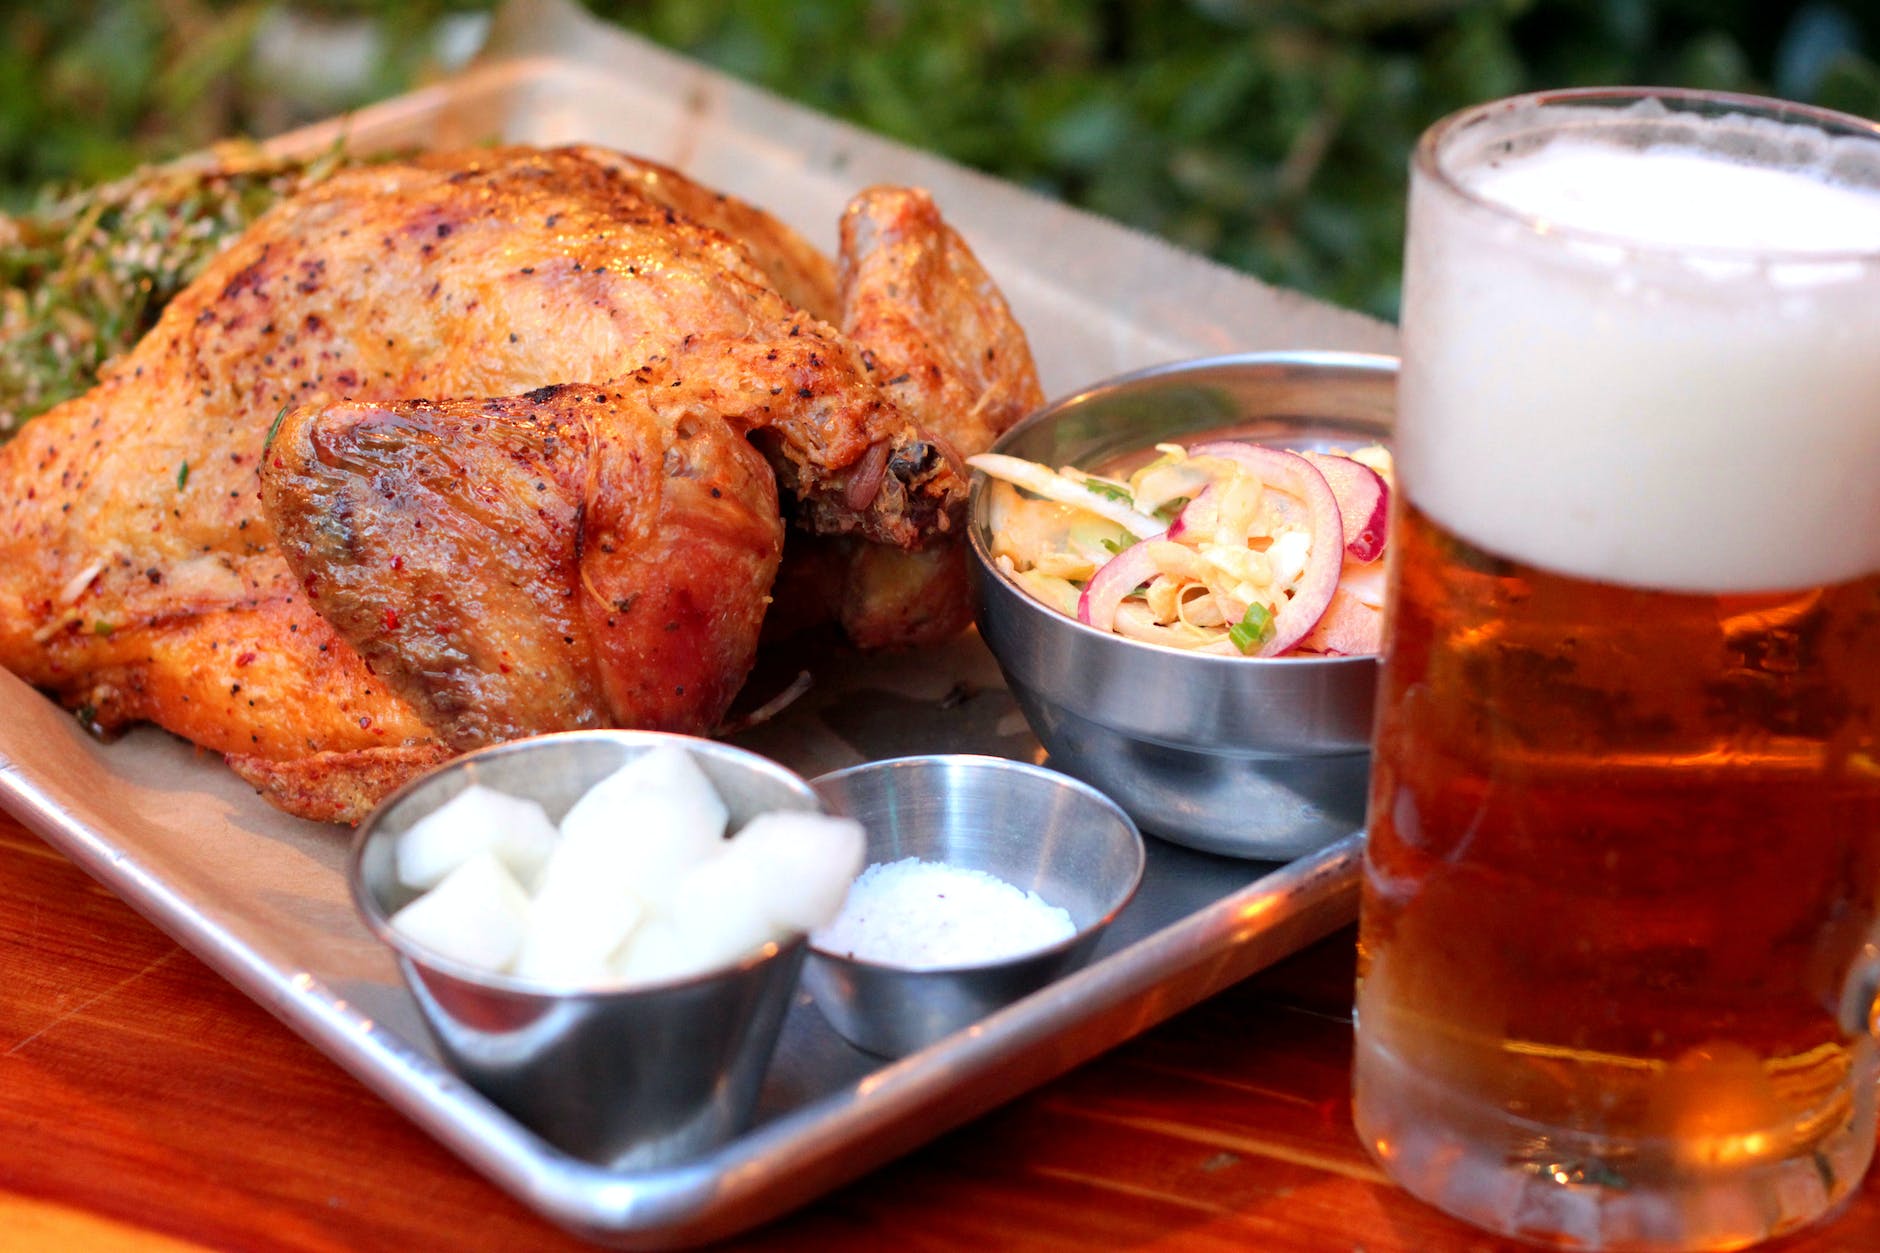 roasted chicken and a lager